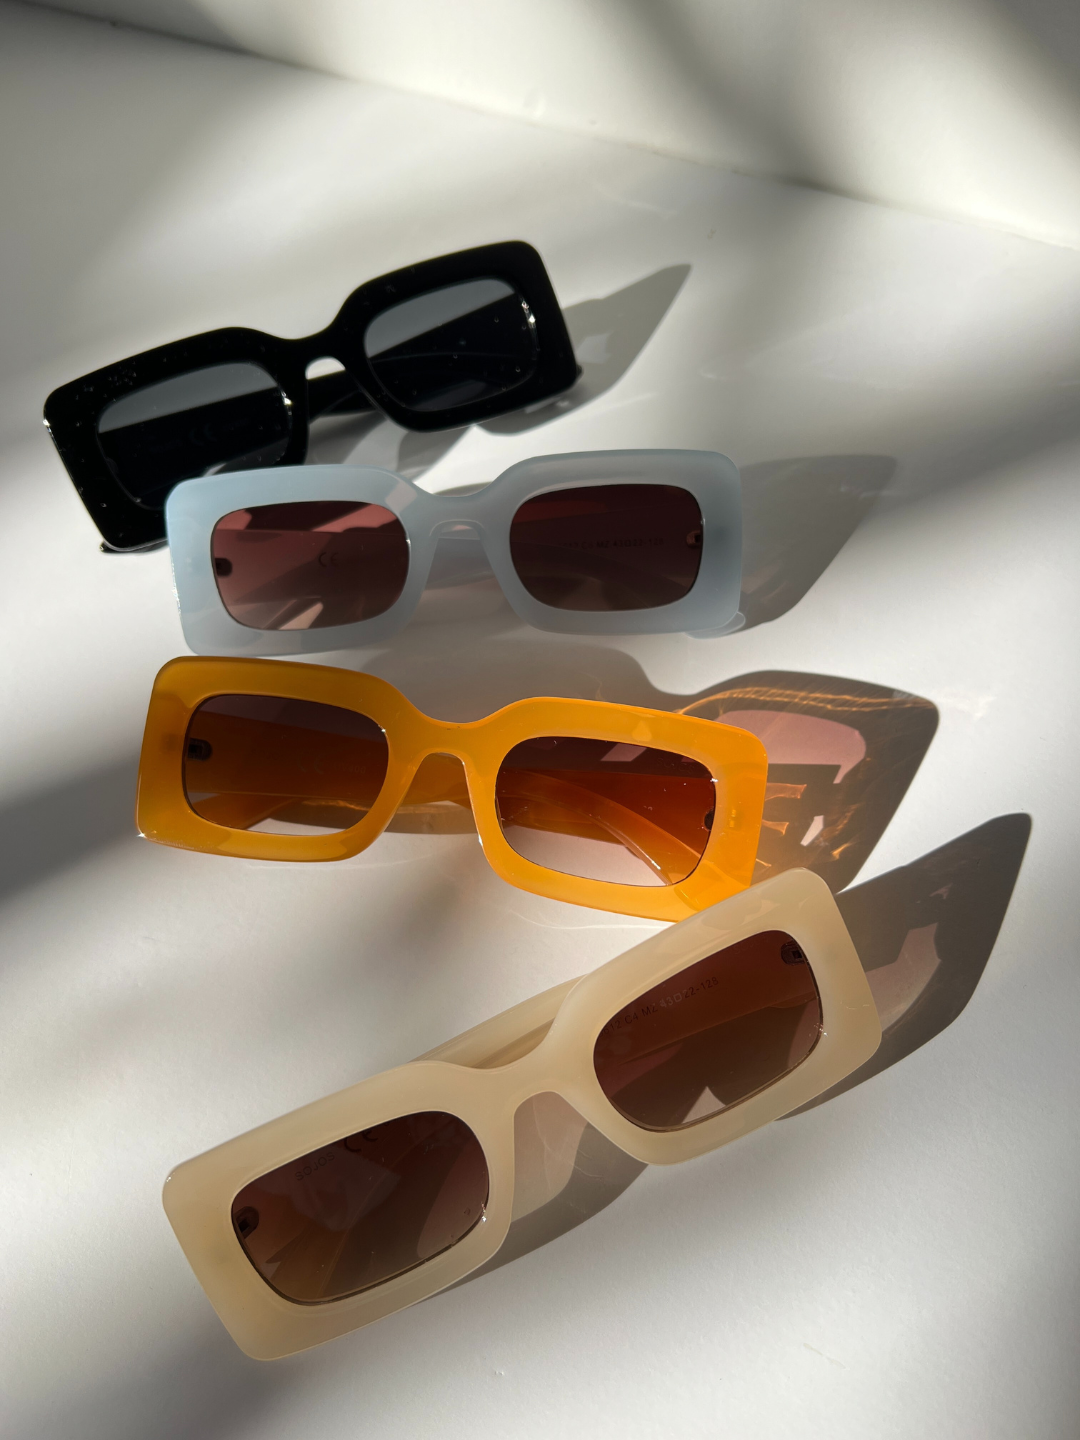 Group of kids rectangle sunglasses in black, blue, orange and cream, arranged on a white background.